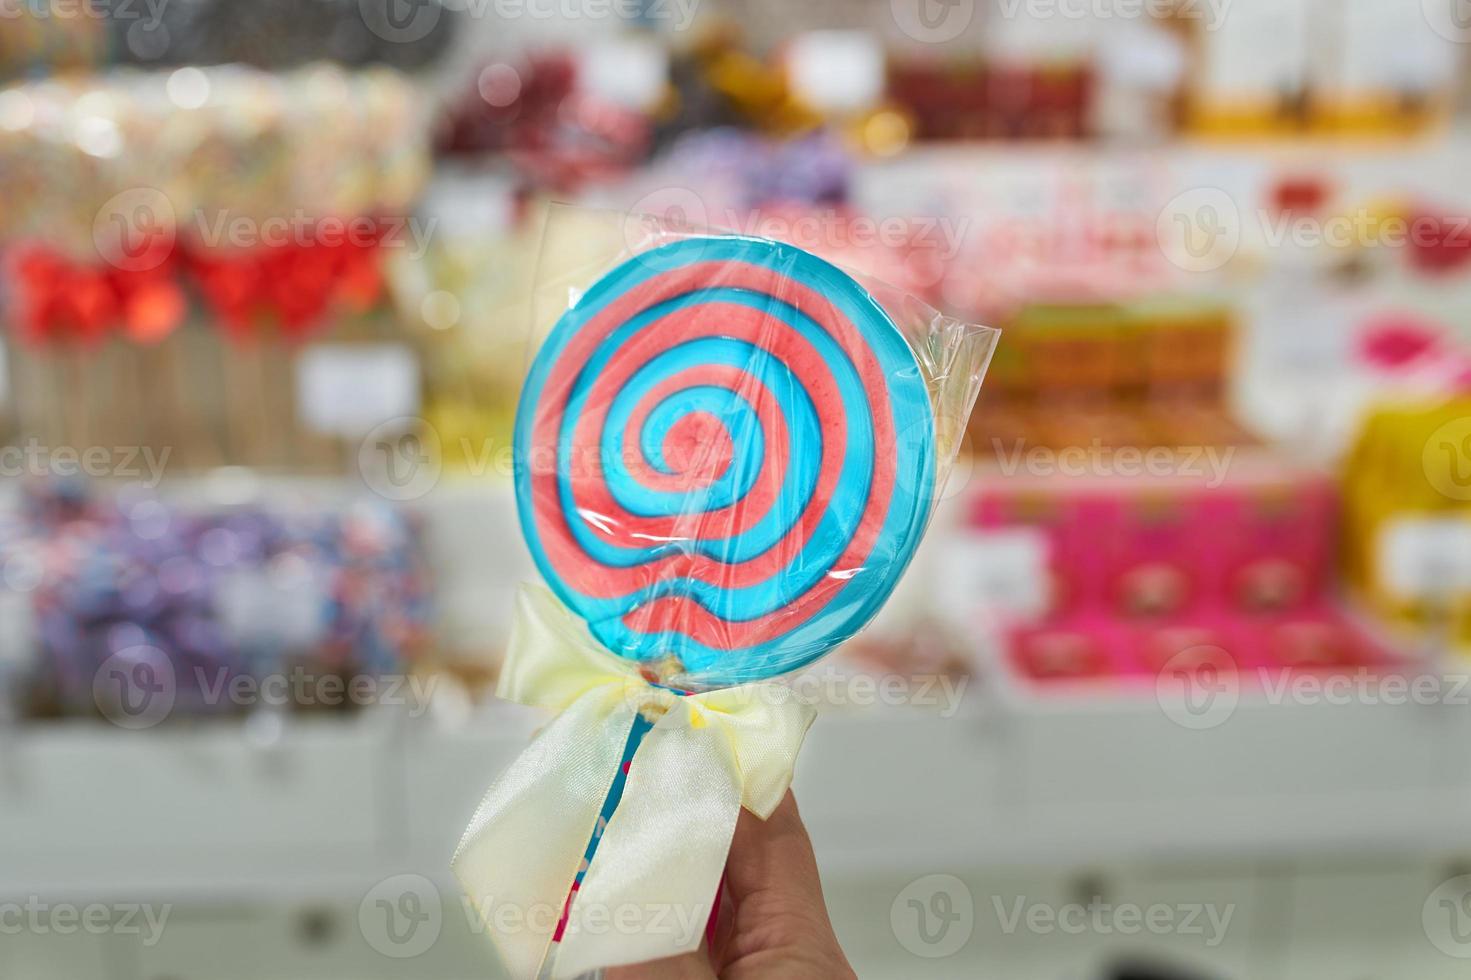 Lollipop with stick on background of shop window. photo